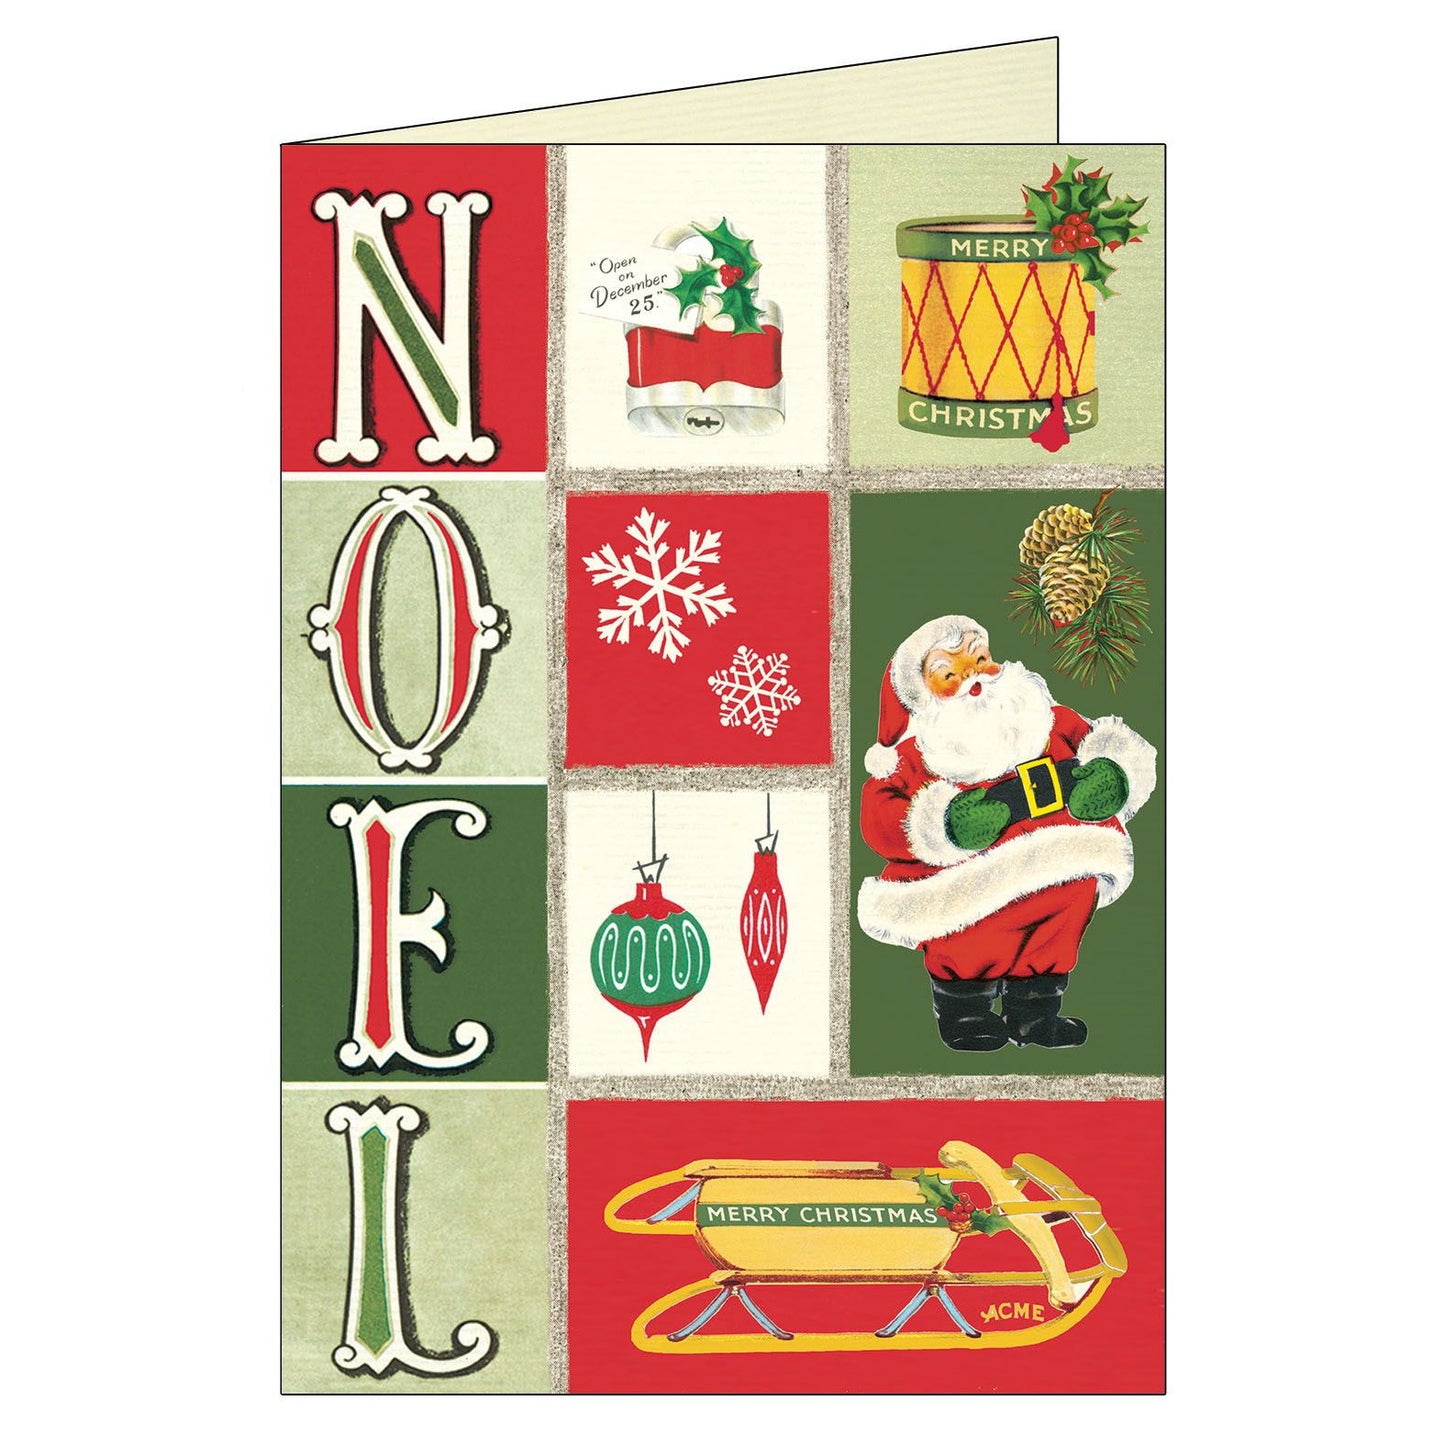 Cavallini & Co. Boxed Note Cards - Noel